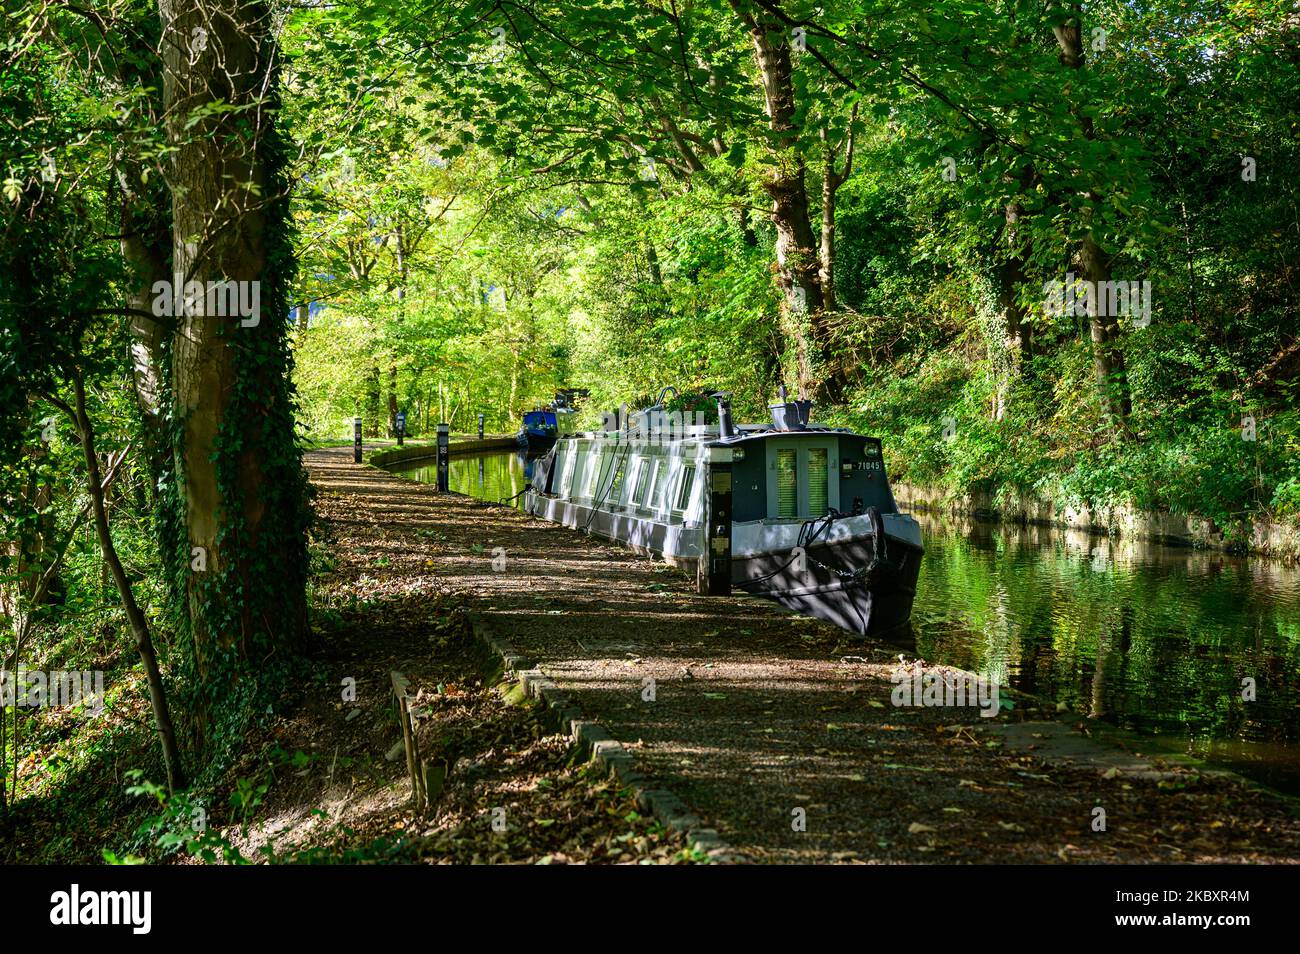 A tranquil scene of a narrowboat moored beneath trees on the Llangollen Canal in Clwyd, Wales in early autumn. Stock Photo